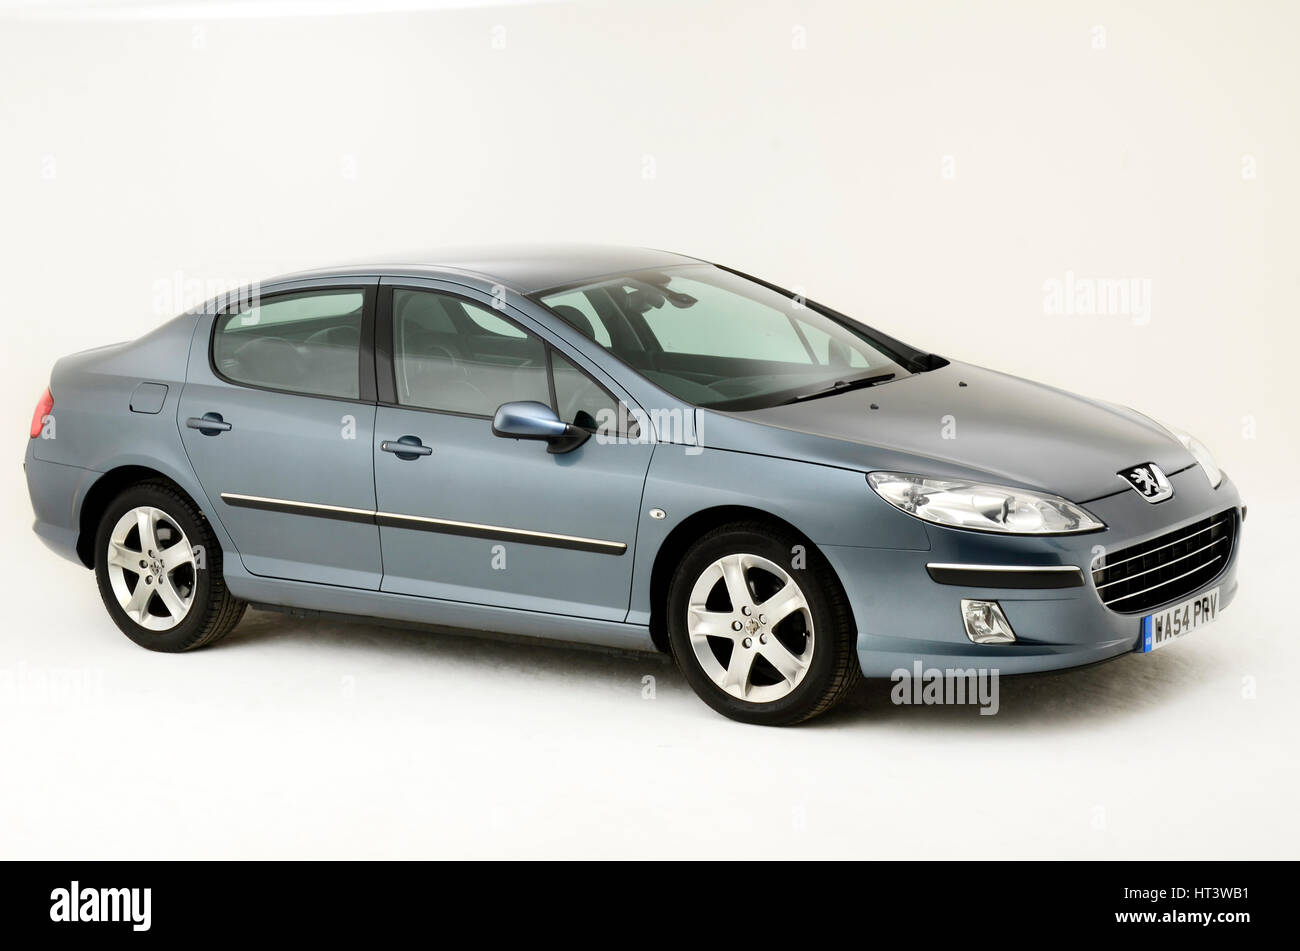 Car, Peugeot 407 2.0 HDI, Limousine, medium class, model year 2004-,  anthracite, standing, upholding, diagonal from the back, re Stock Photo -  Alamy